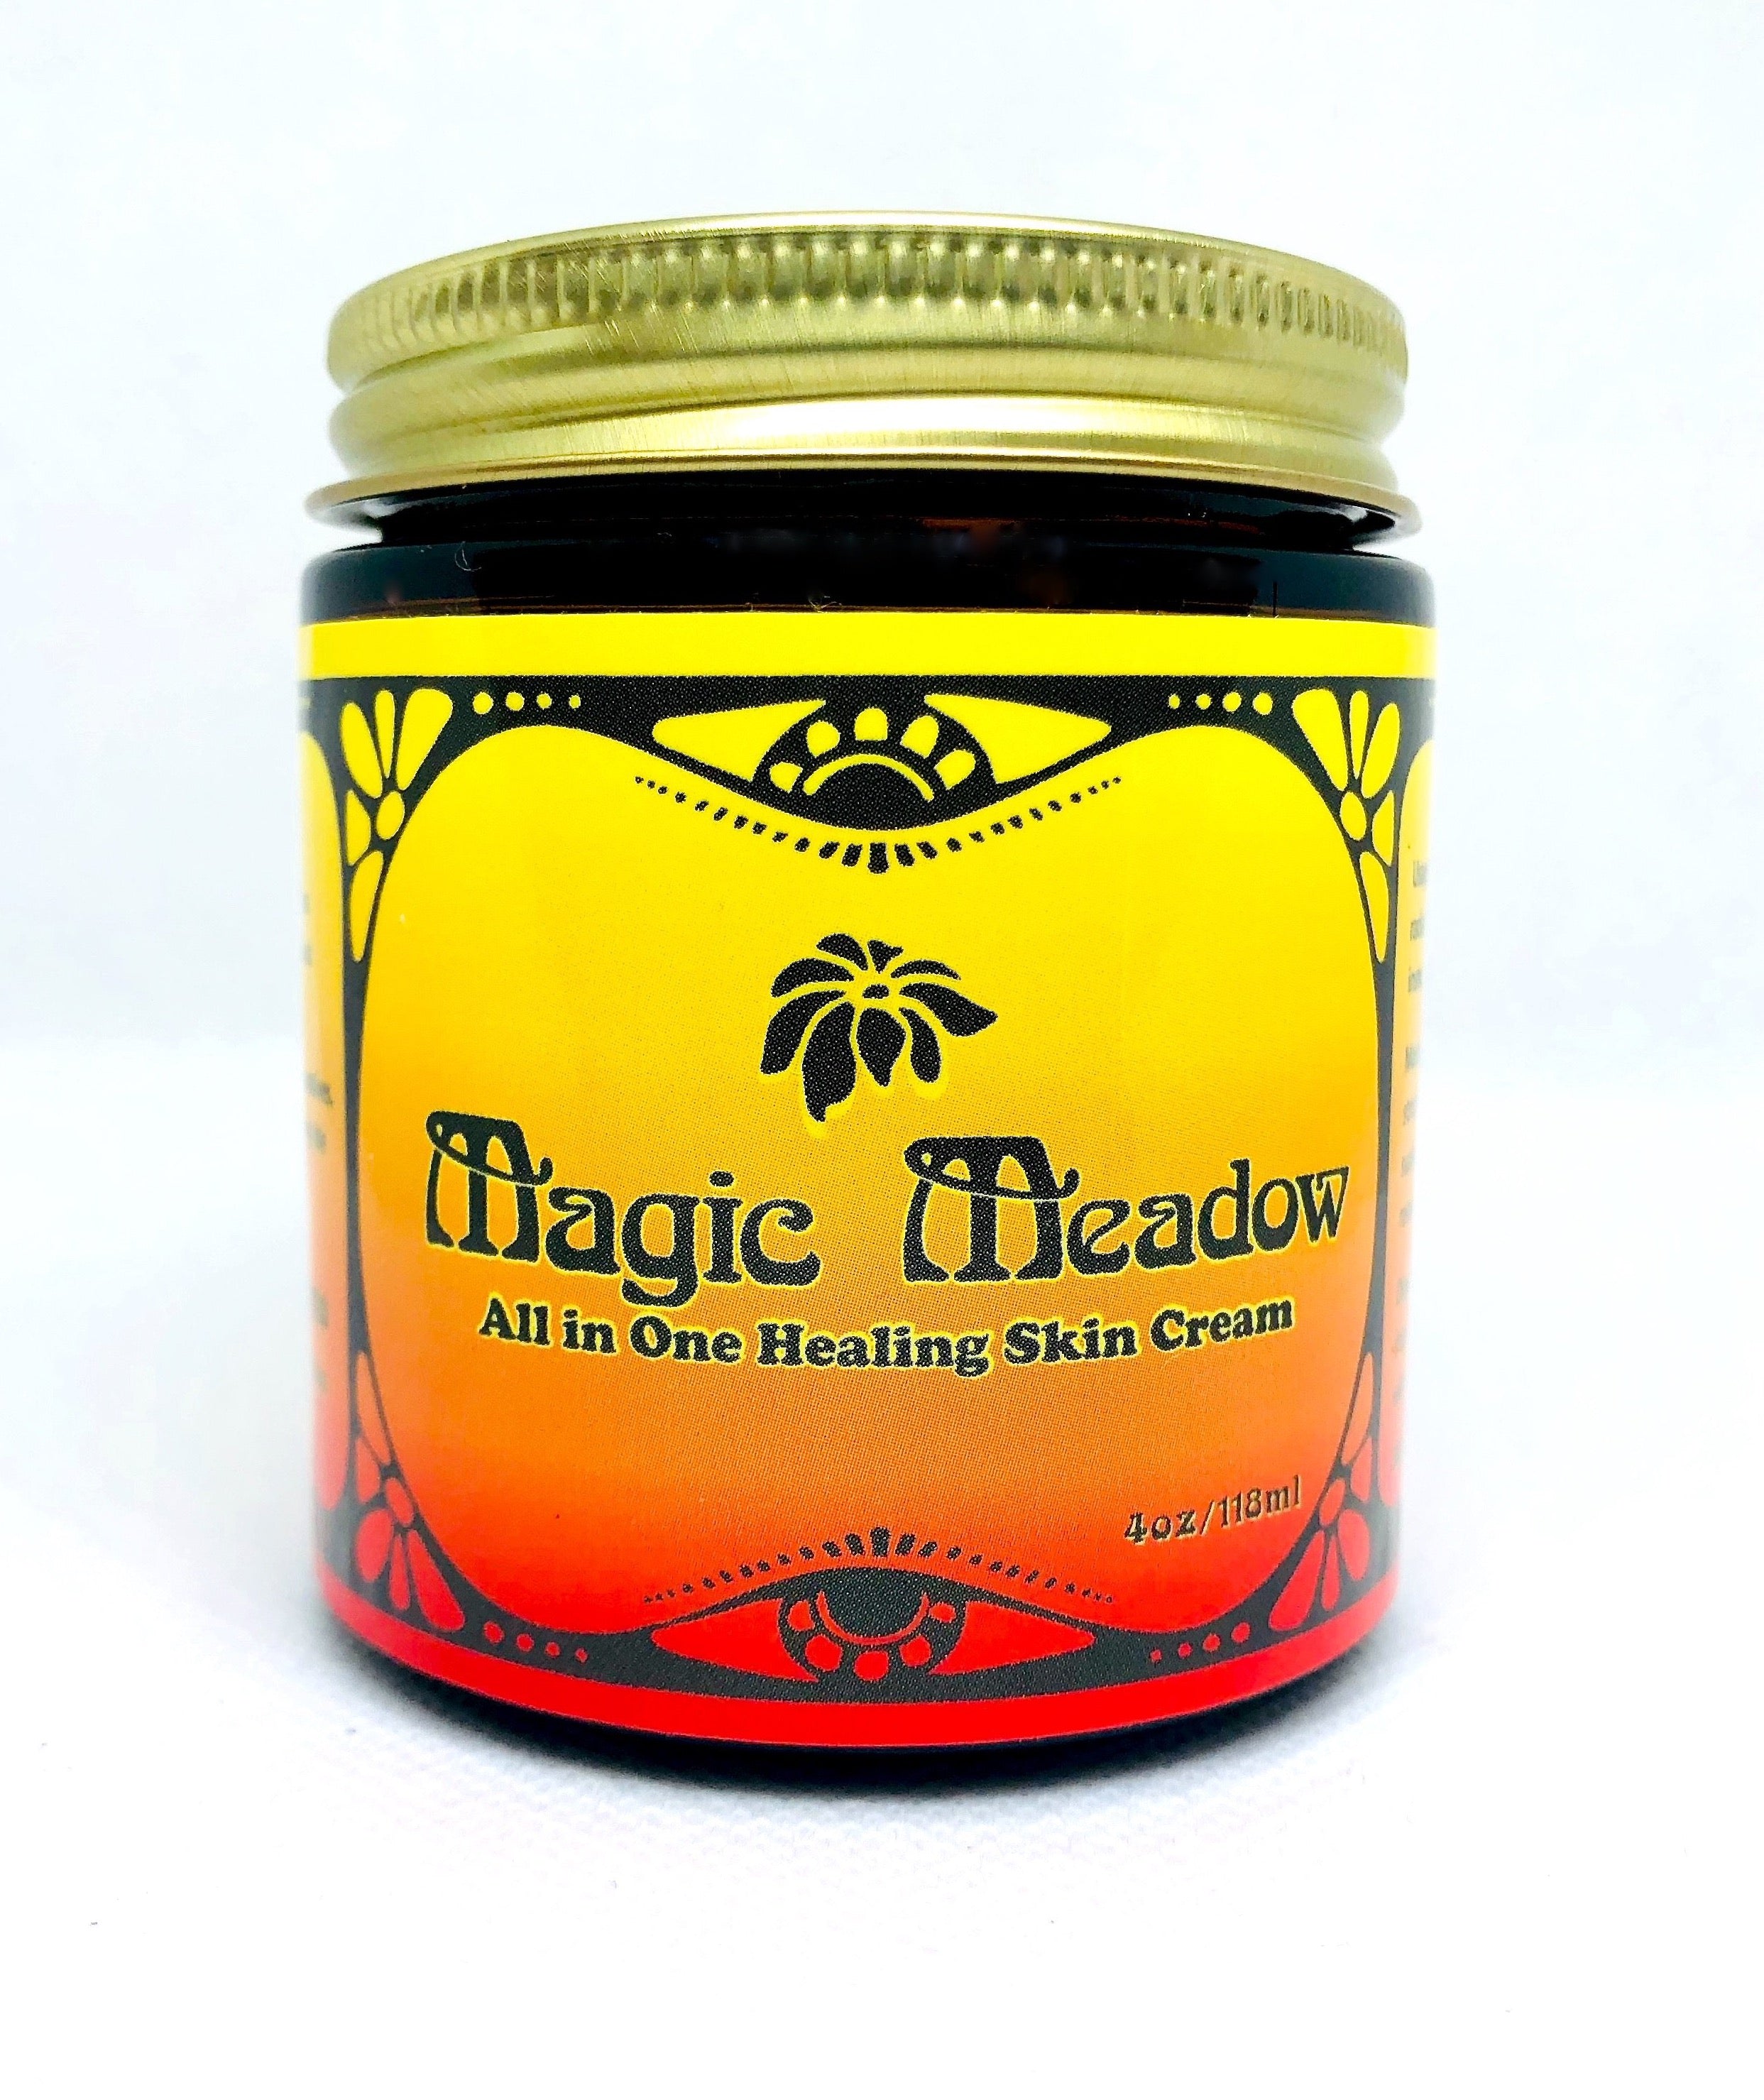 Magic Meadow All In One Organic Healing Skin Cream all natural ingredients,  sustainable packaging plastic free zero waste recyclable packaging  